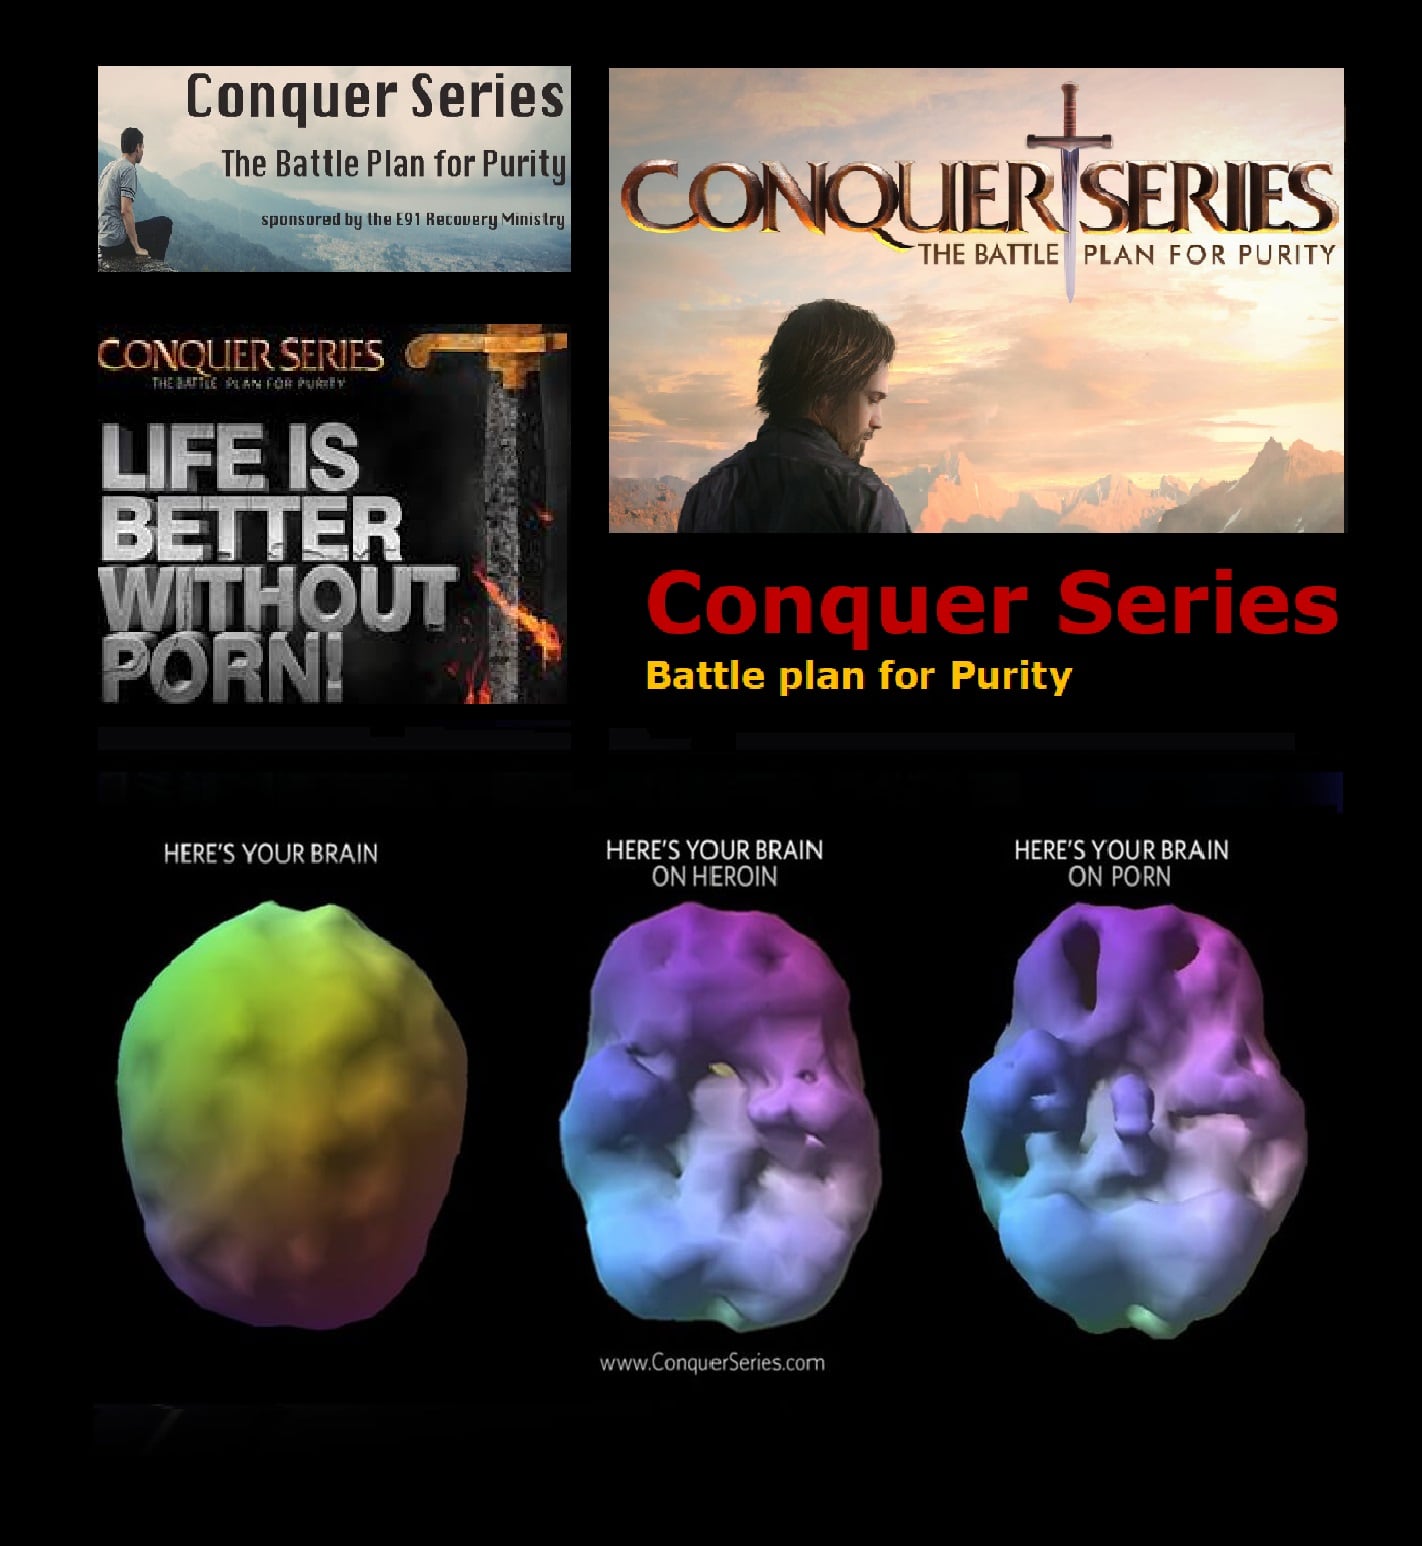 The Conquer Series